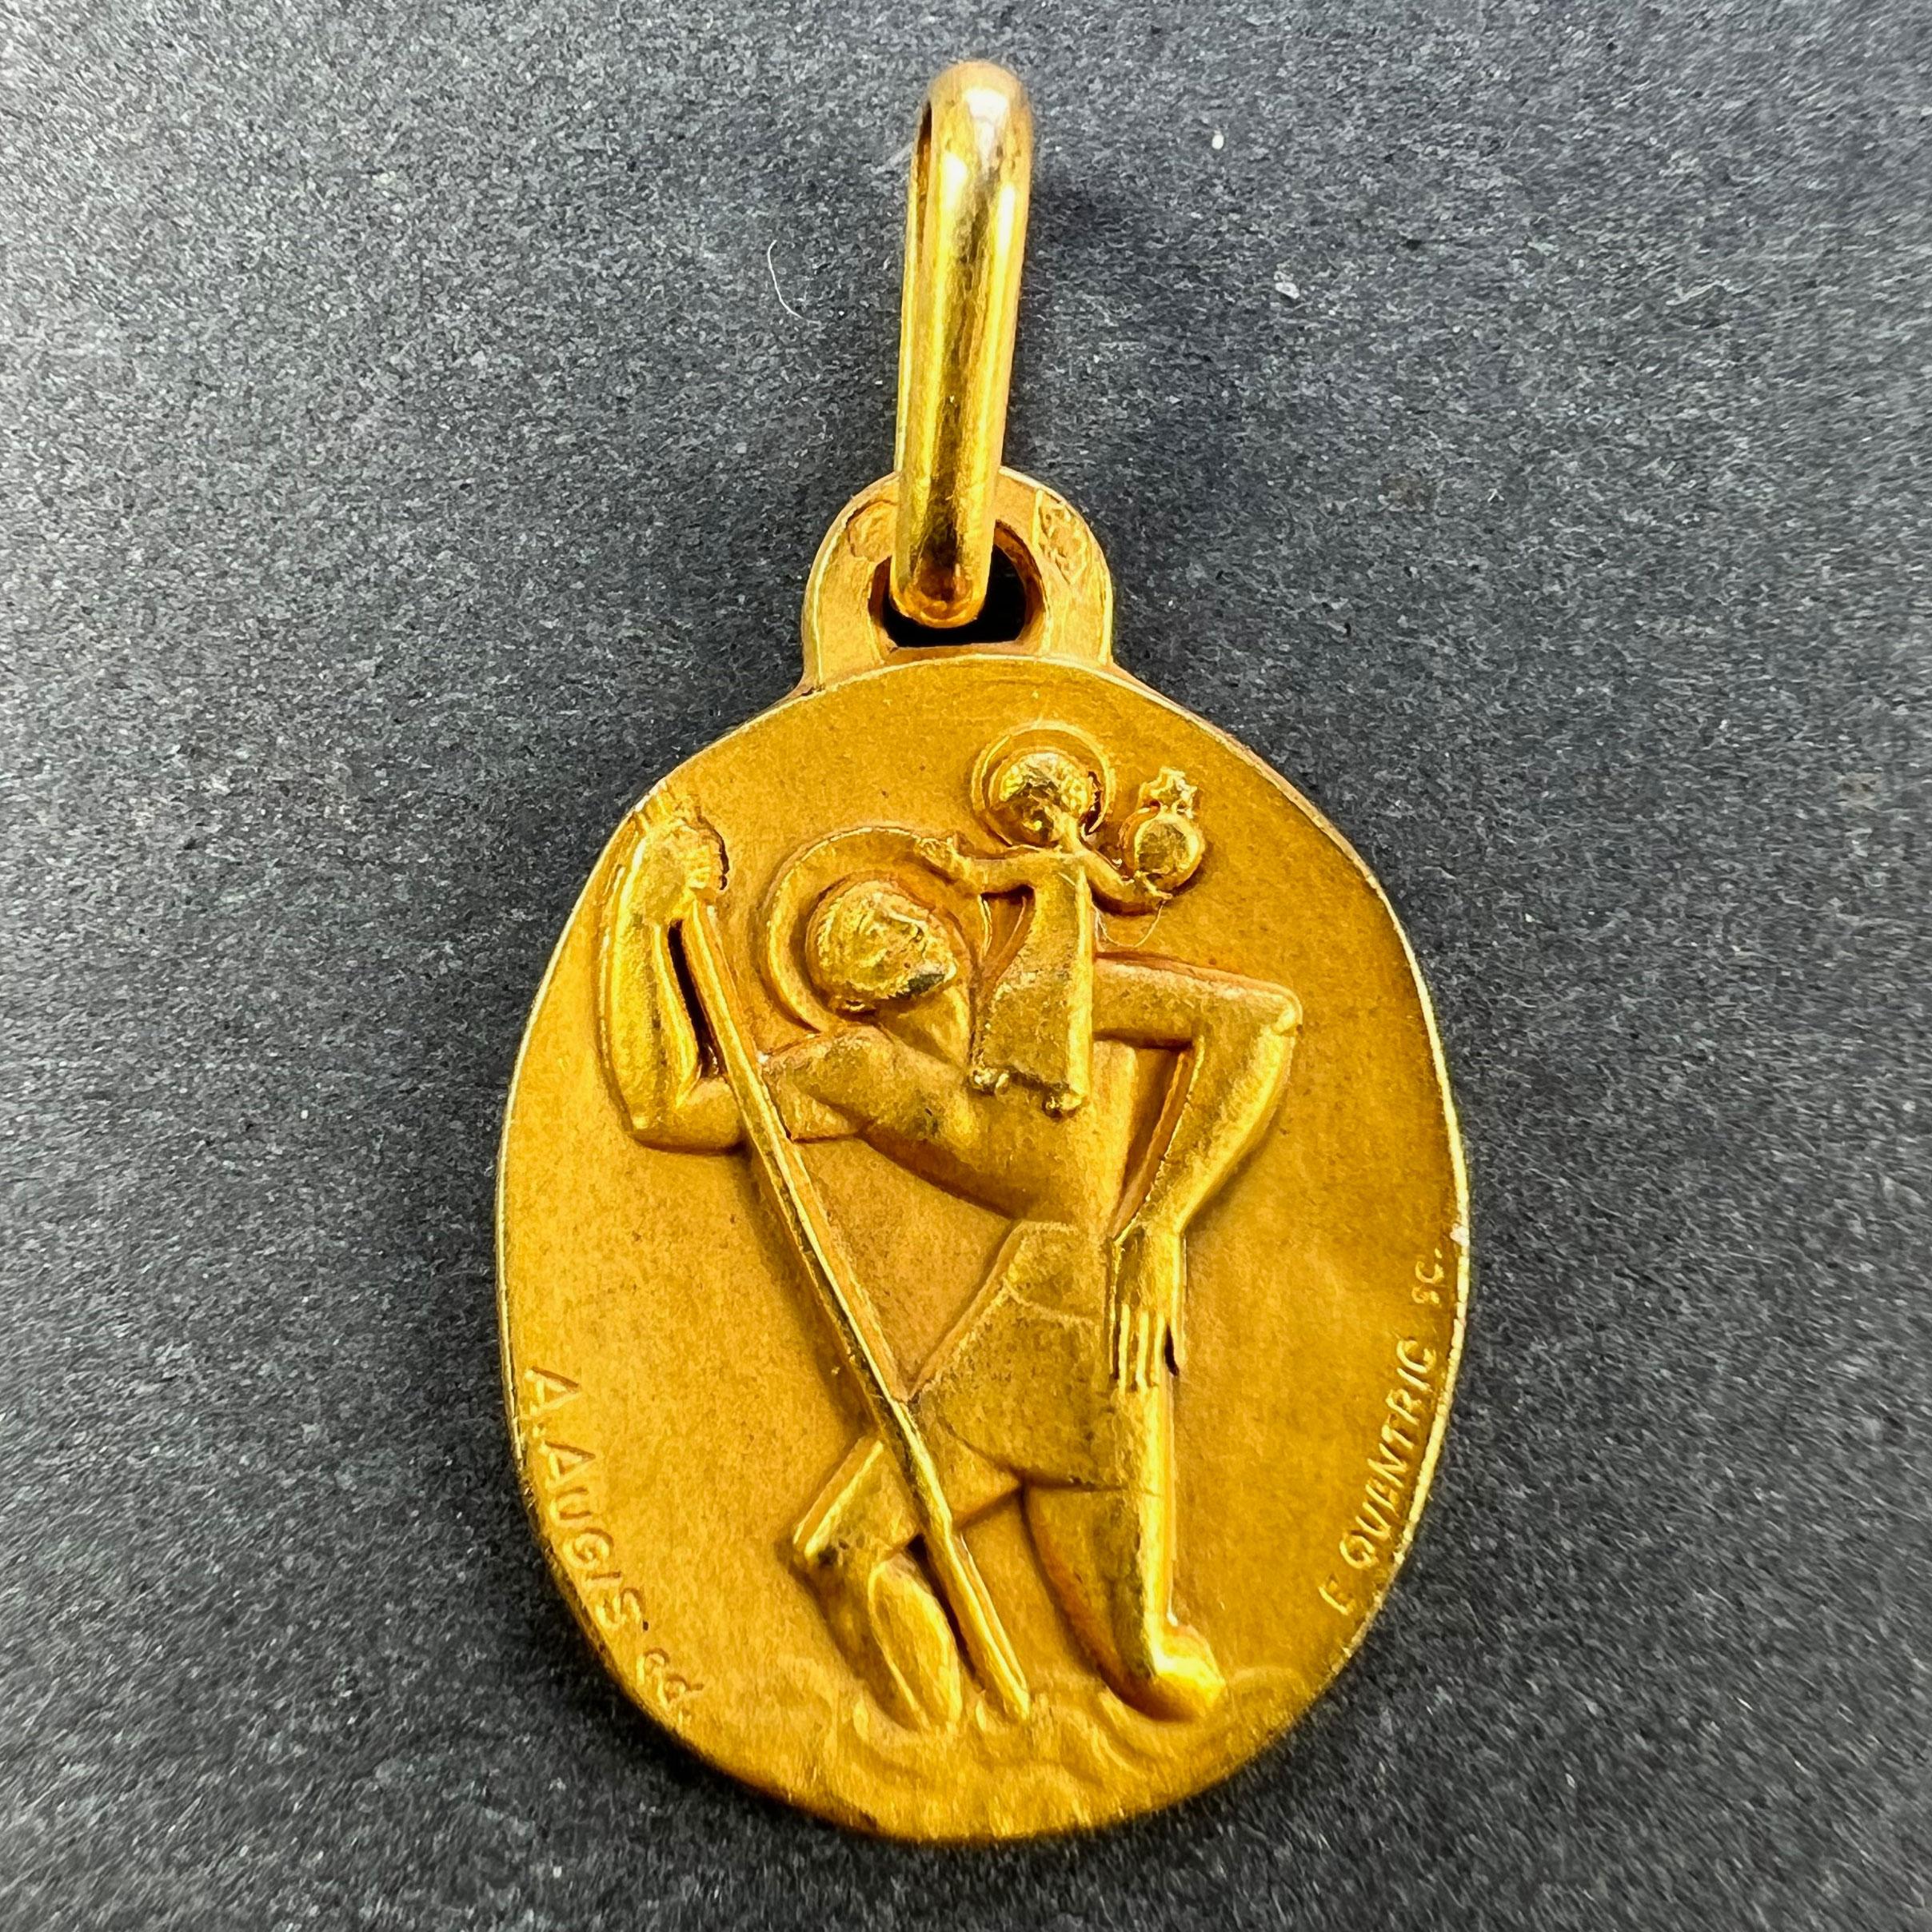 A French 18 karat (18K) yellow gold charm pendant or medal designed by Quentric for Augis depicting St Christopher carrying the infant Christ across the river. Stamped with the eagle's head for French manufacture, Augis' makers mark, and signed A.